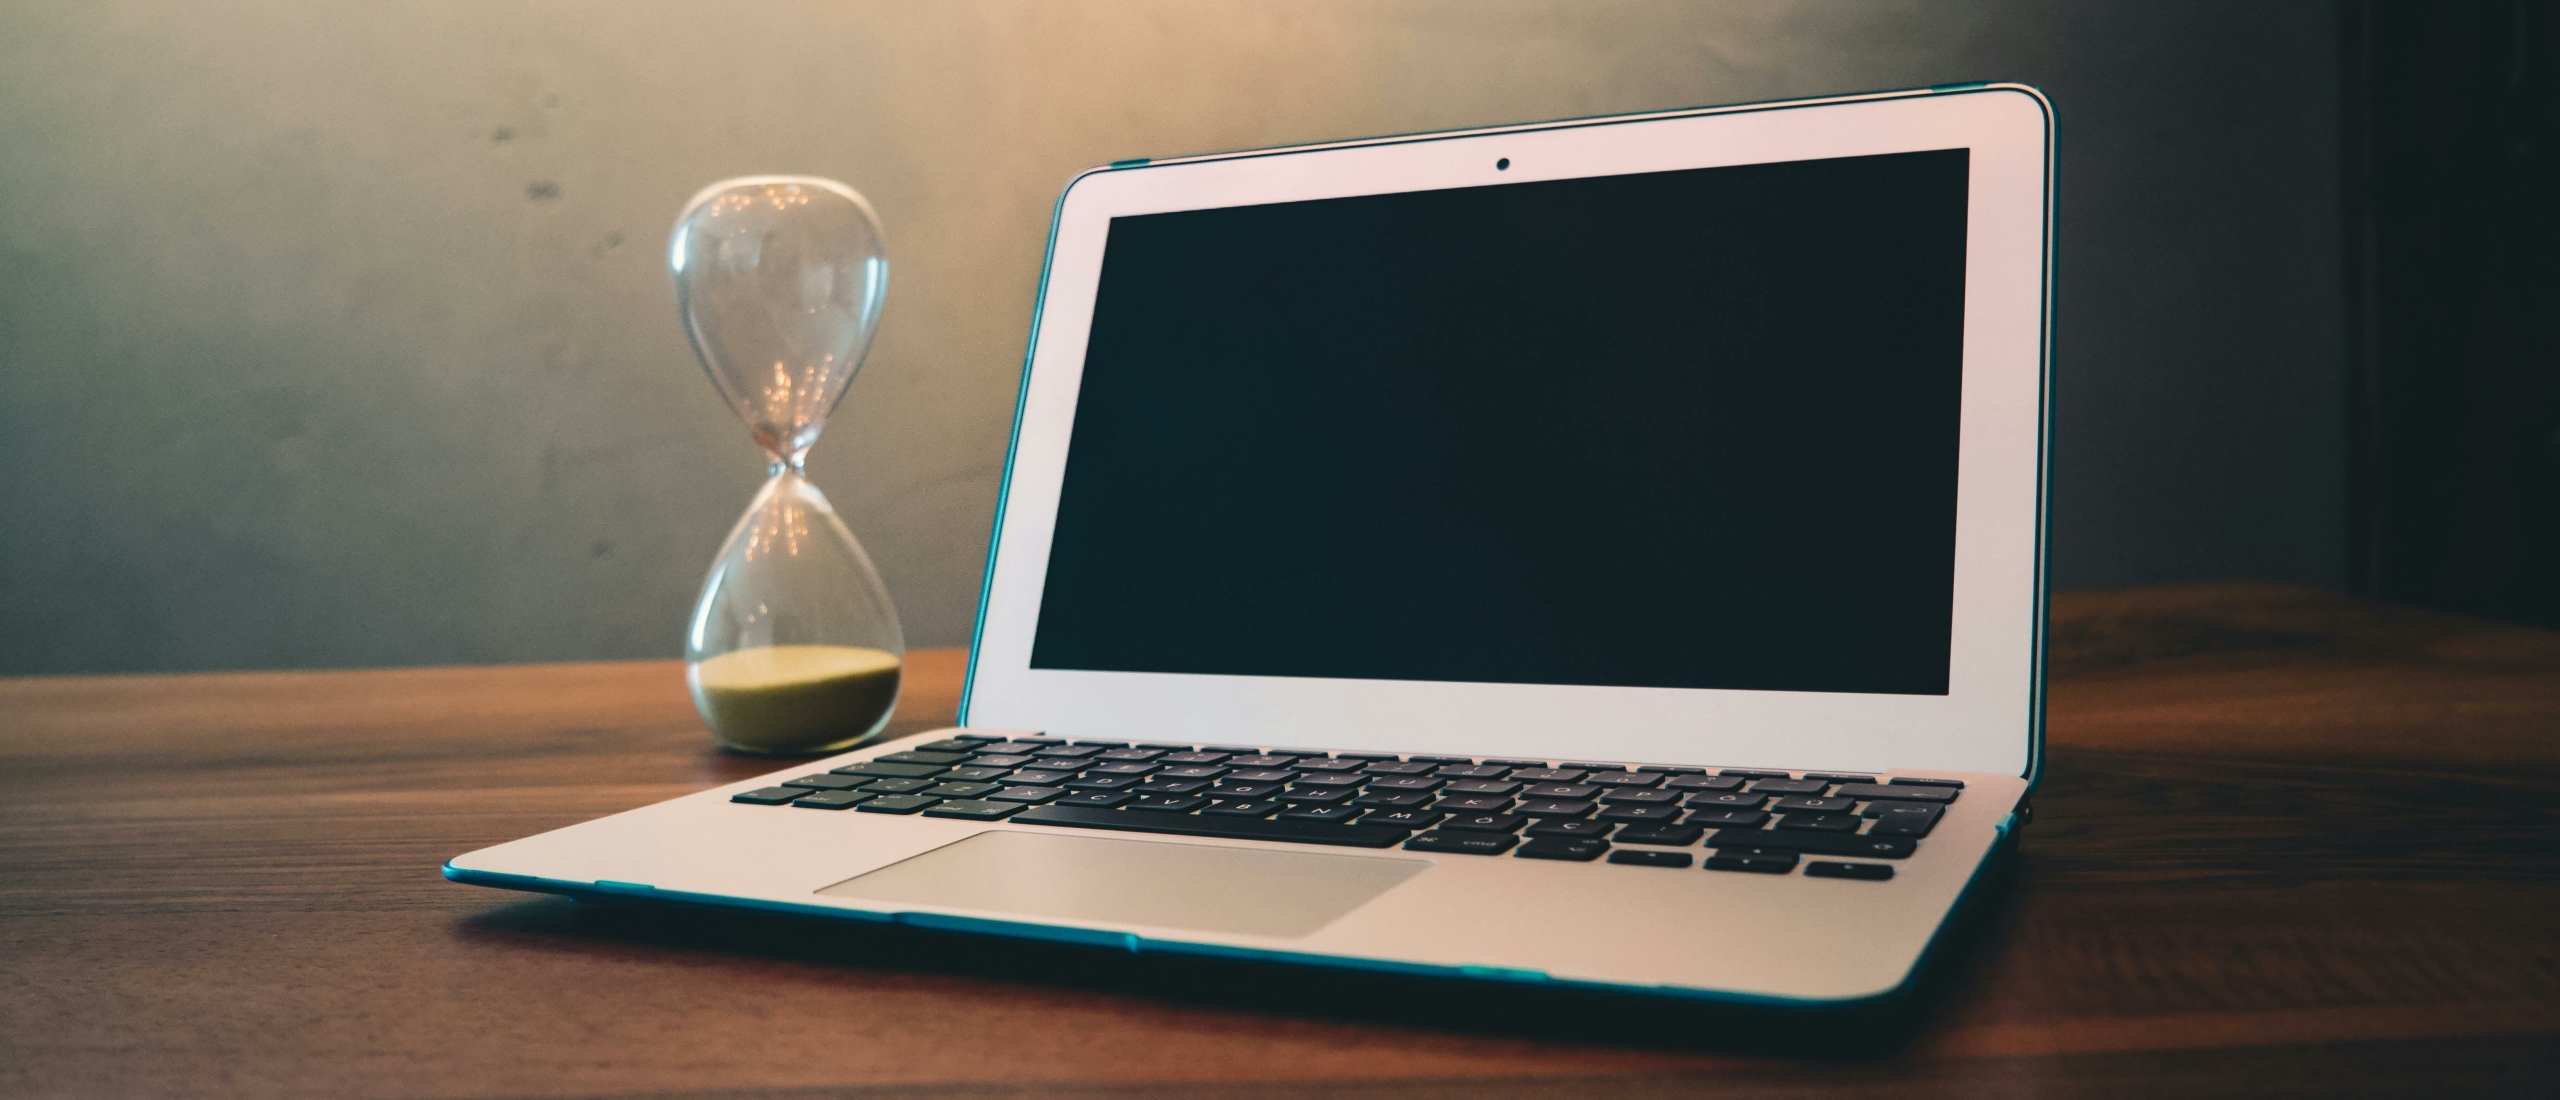 Laptop and Hourglass